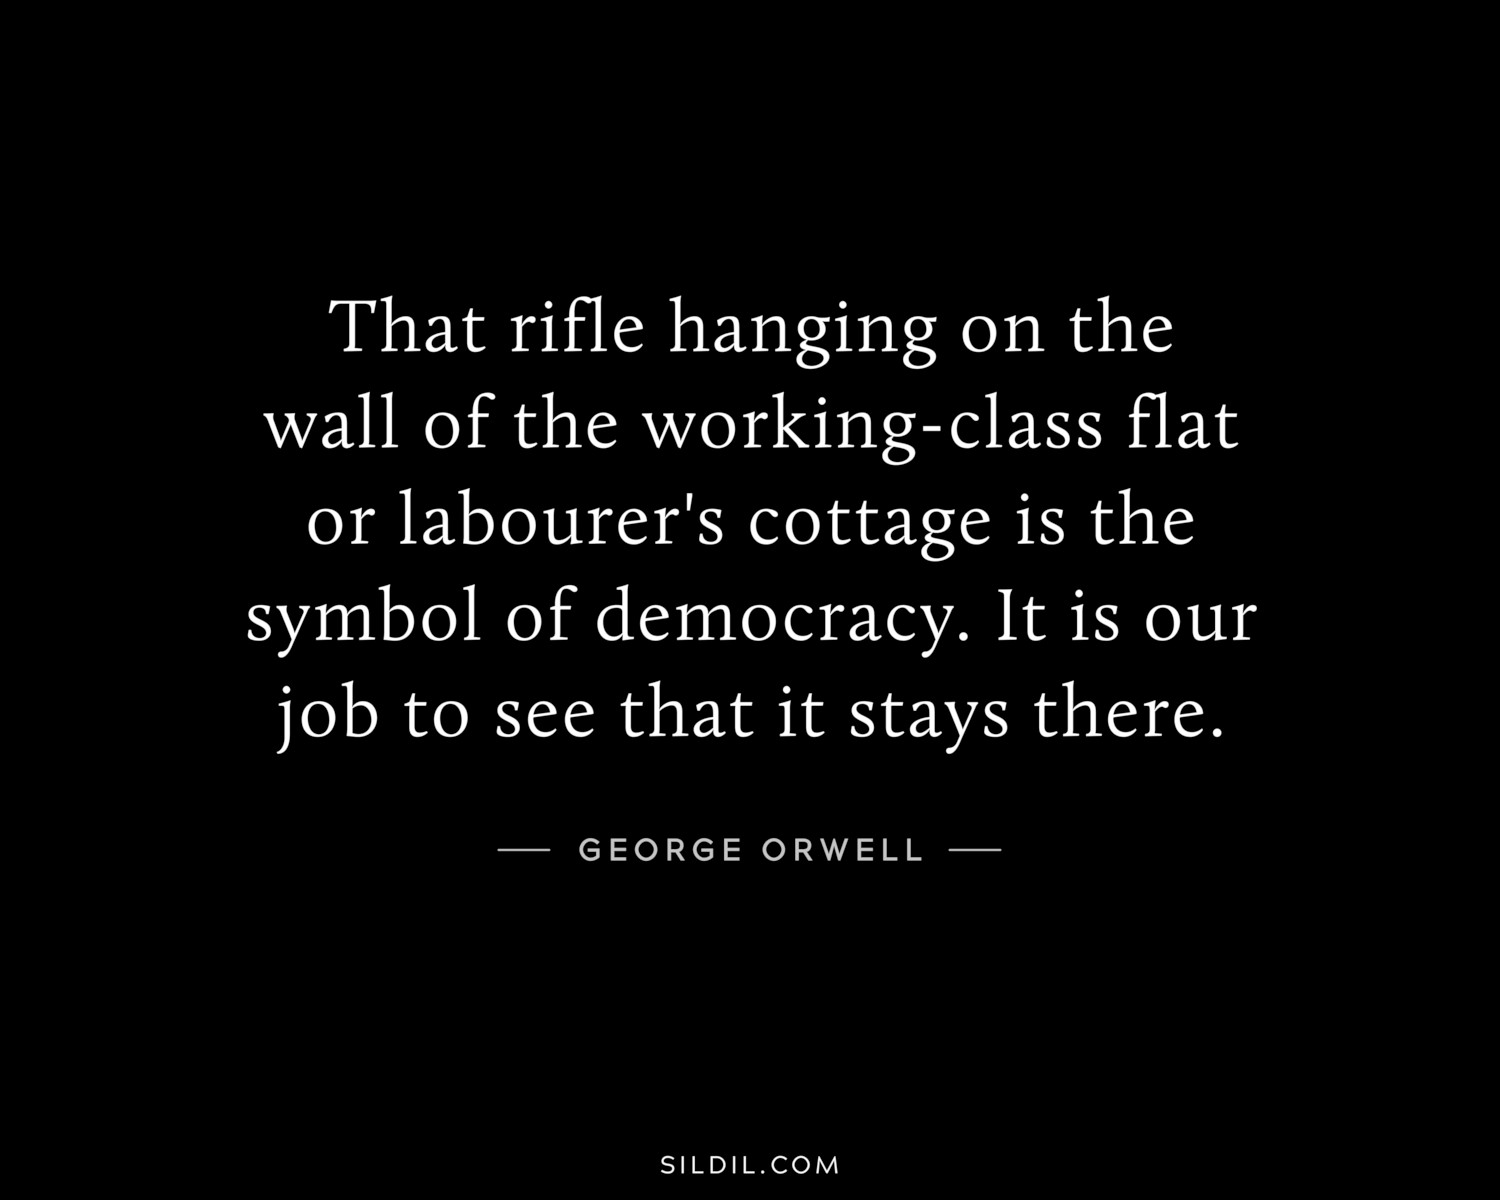 That rifle hanging on the wall of the working-class flat or labourer's cottage is the symbol of democracy. It is our job to see that it stays there.